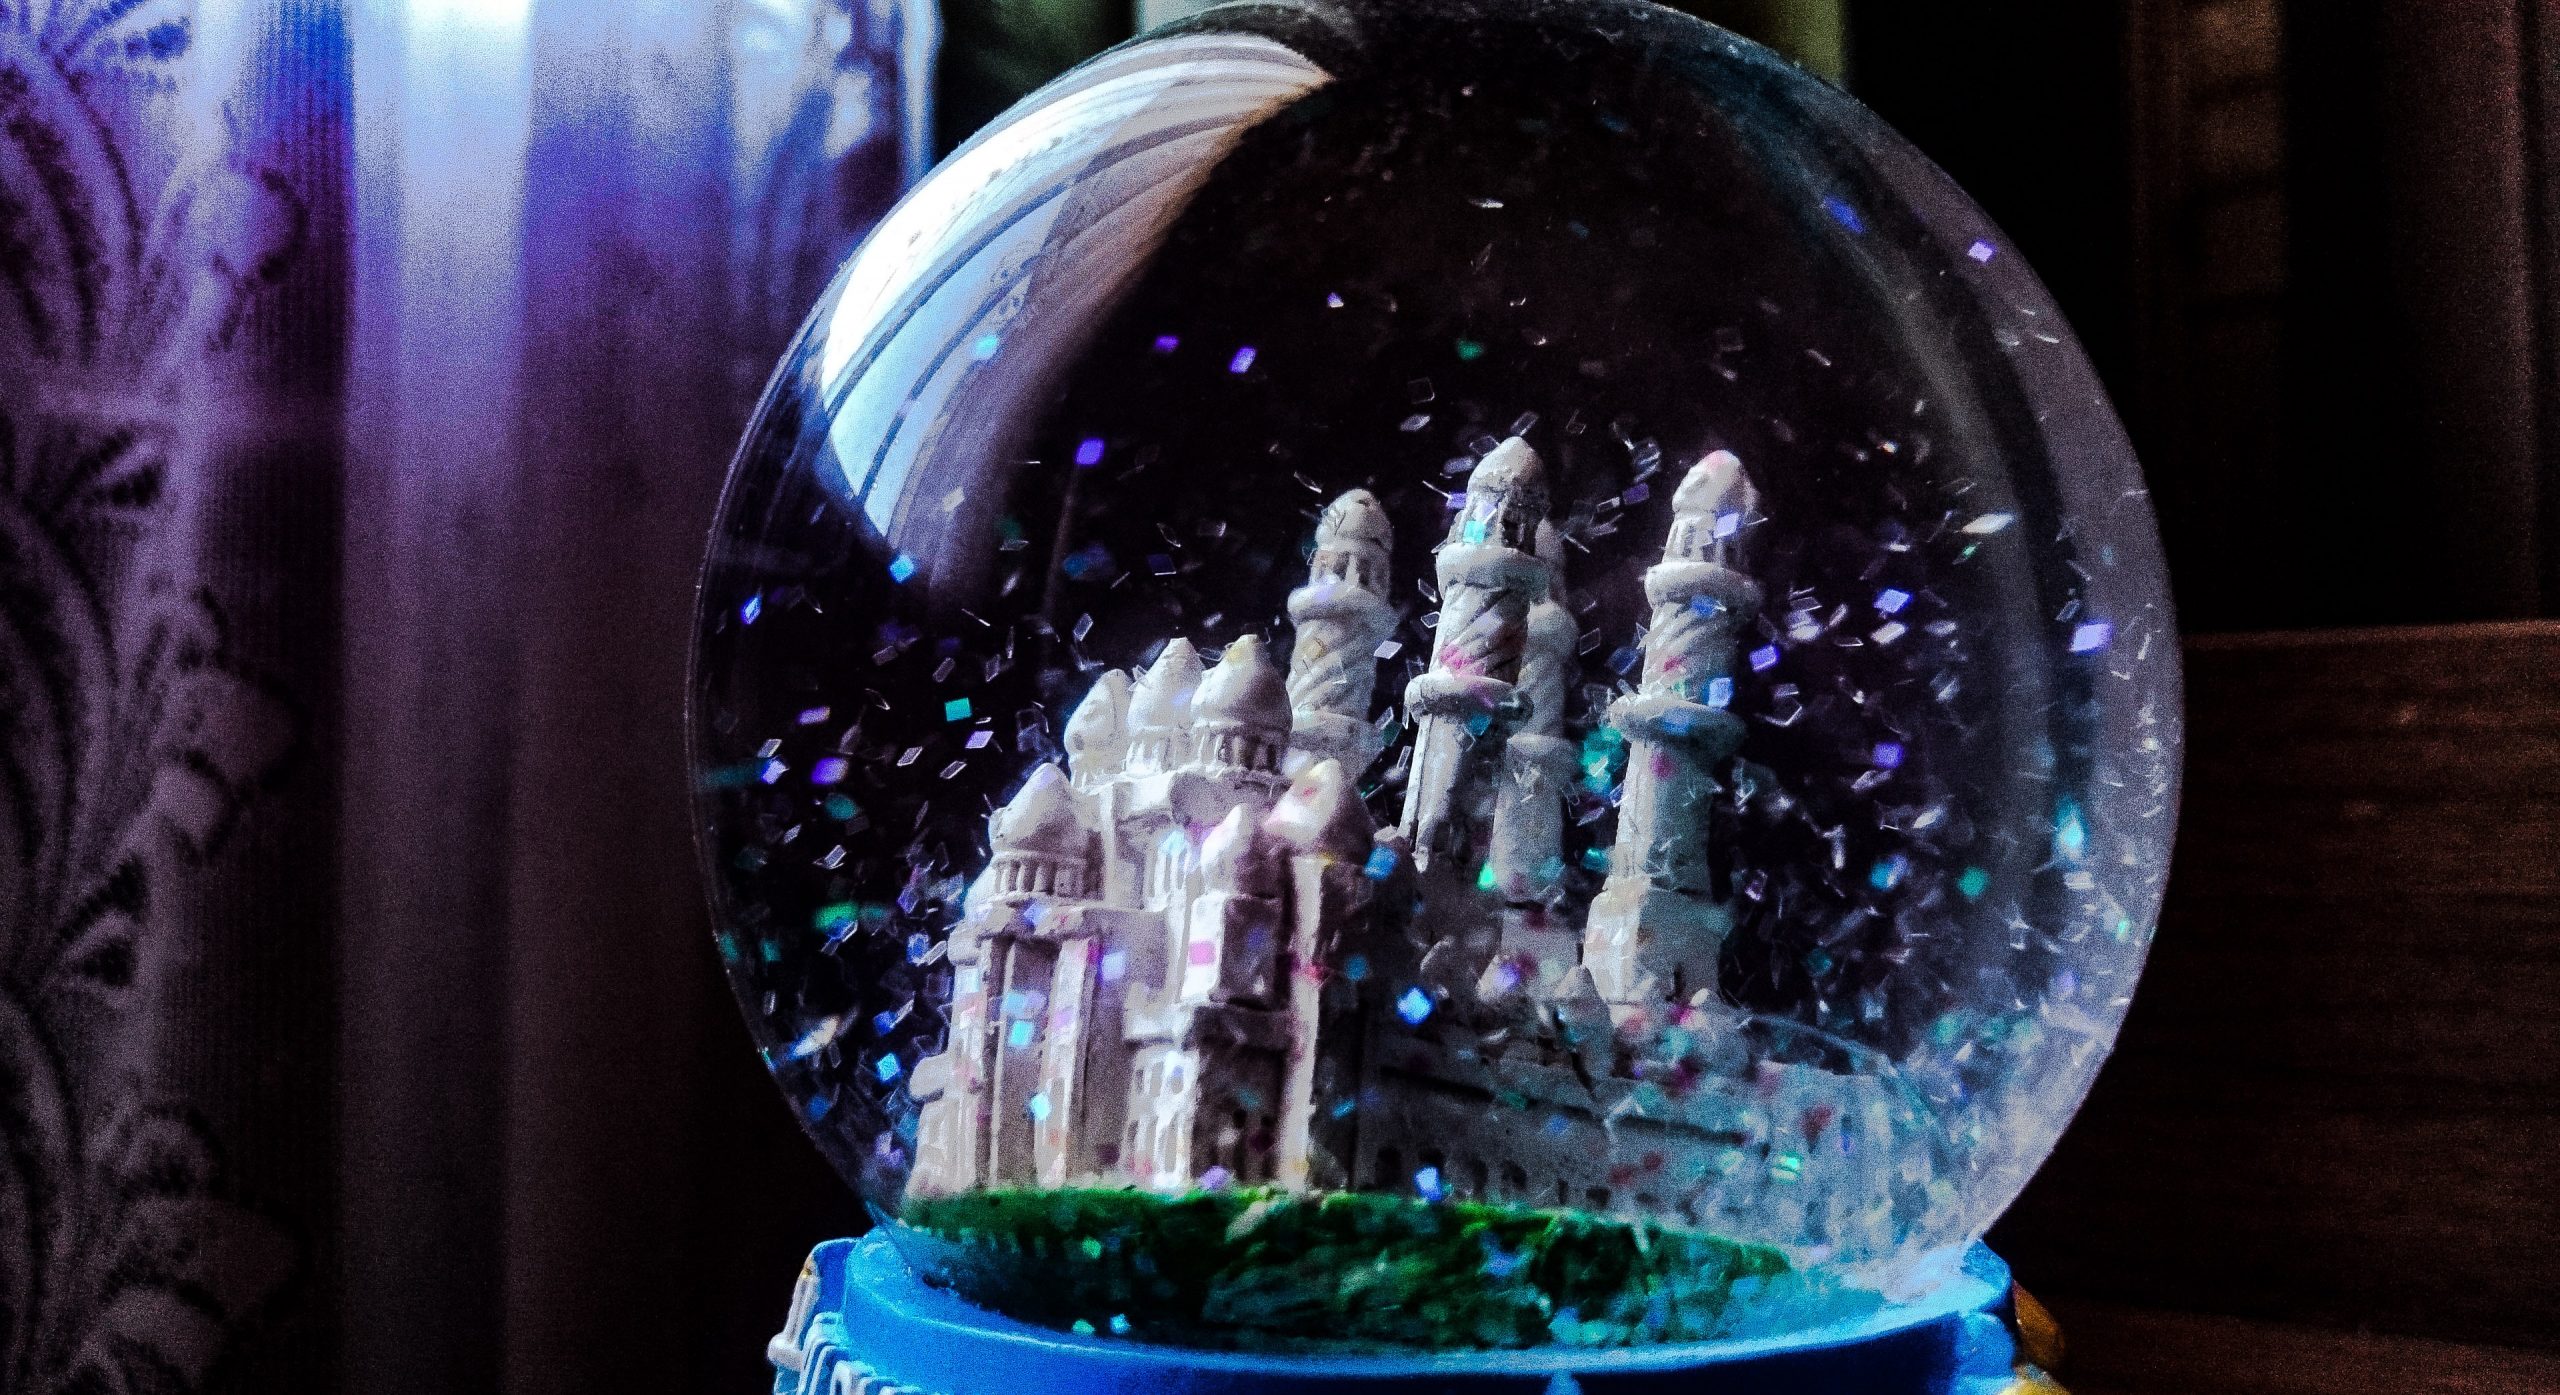 A snow globe with a castle and greenery inside it resting on a blue stand with purple curtains and a brown wooden cupboard behind it